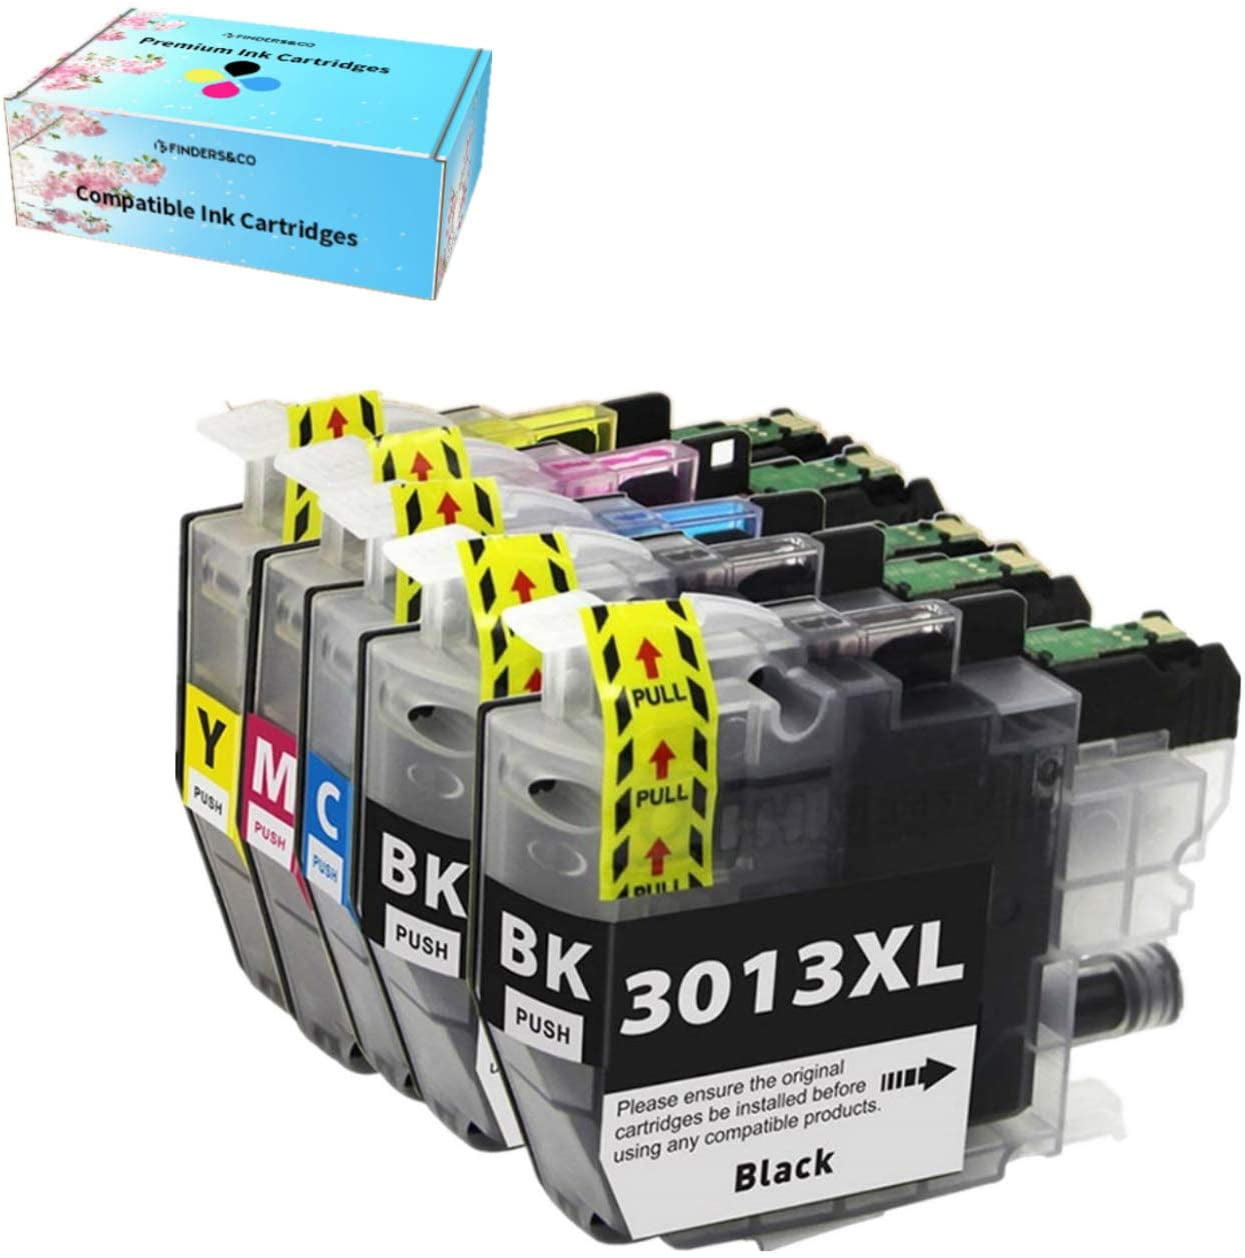 F Findersandco Compatible Ink Cartridges Replacement For Brother Lc 3013 Lc 3013 Lc3013 Lc3011 Ink 0024